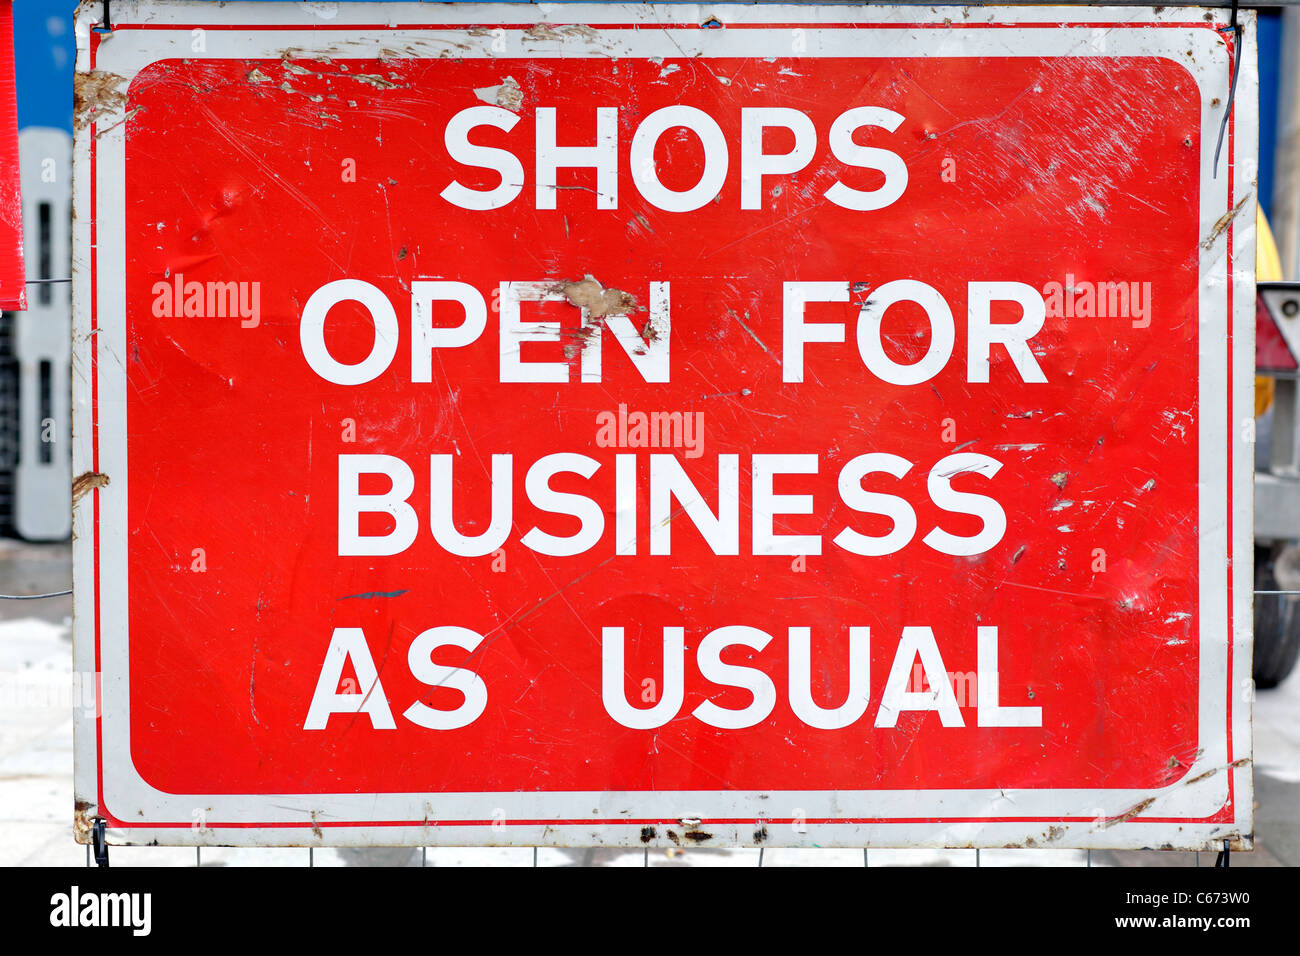 Construction sign - shops open for business as usual Stock Photo